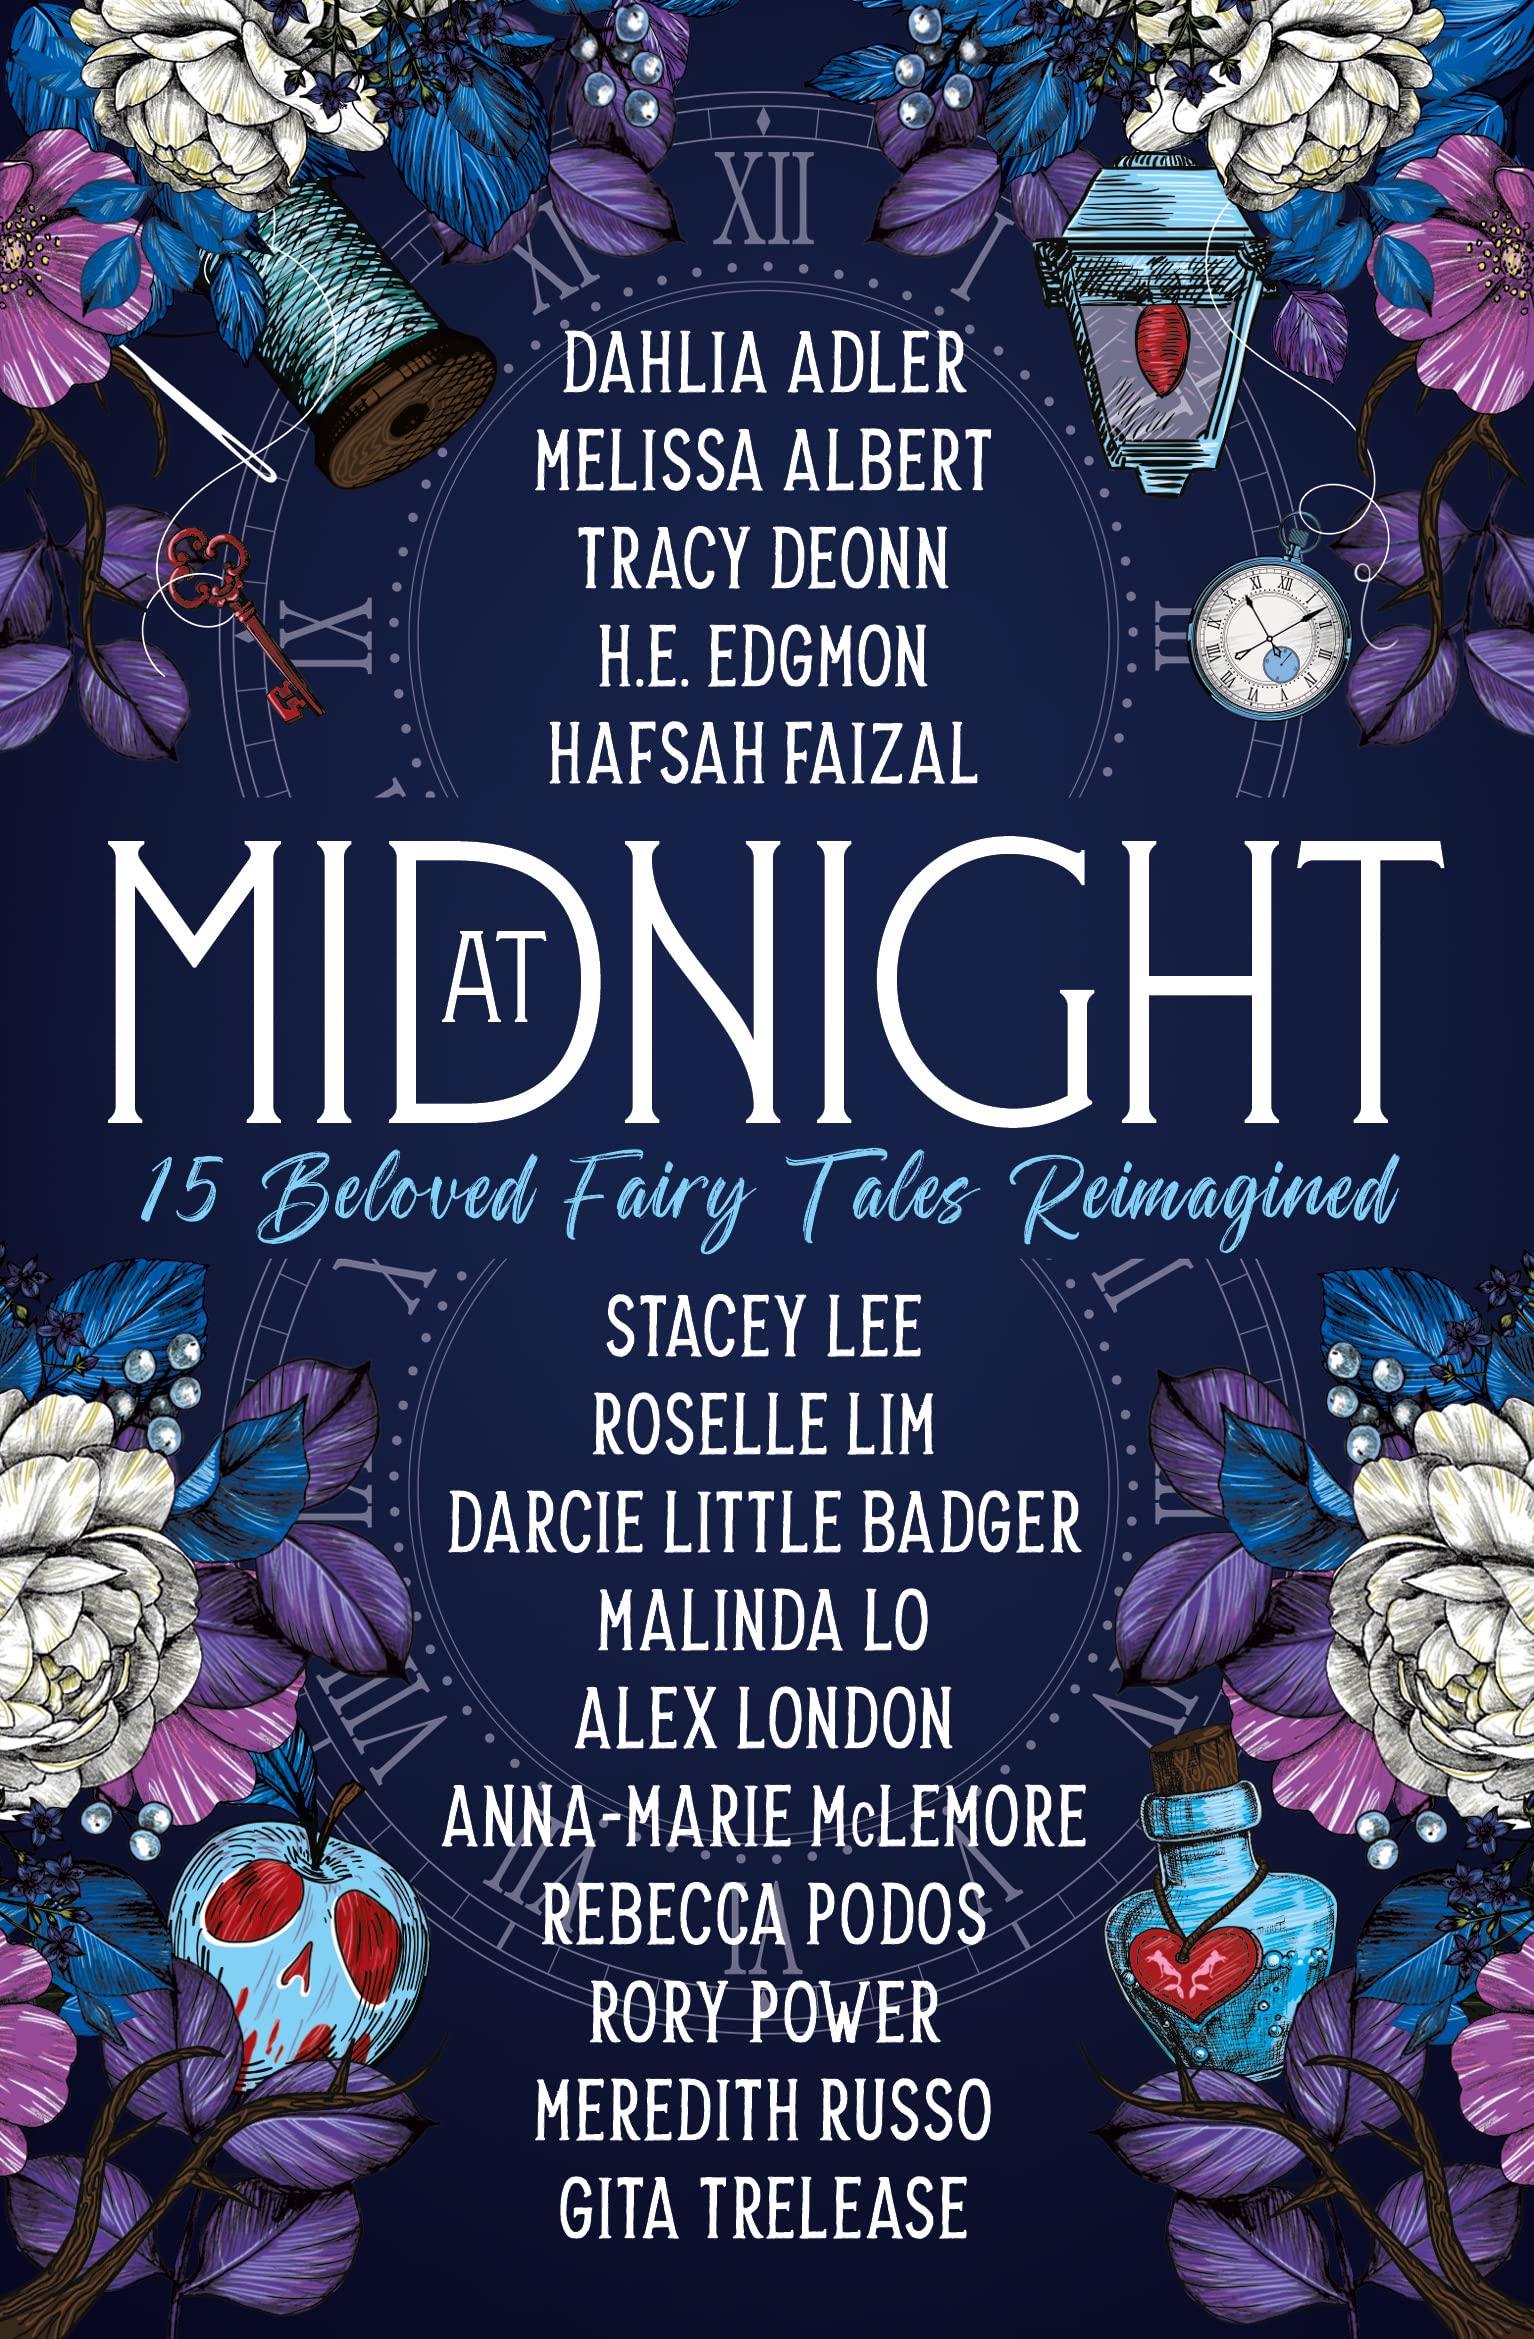 At Midnight - 15 Beloved Fairy Tales Reimagined